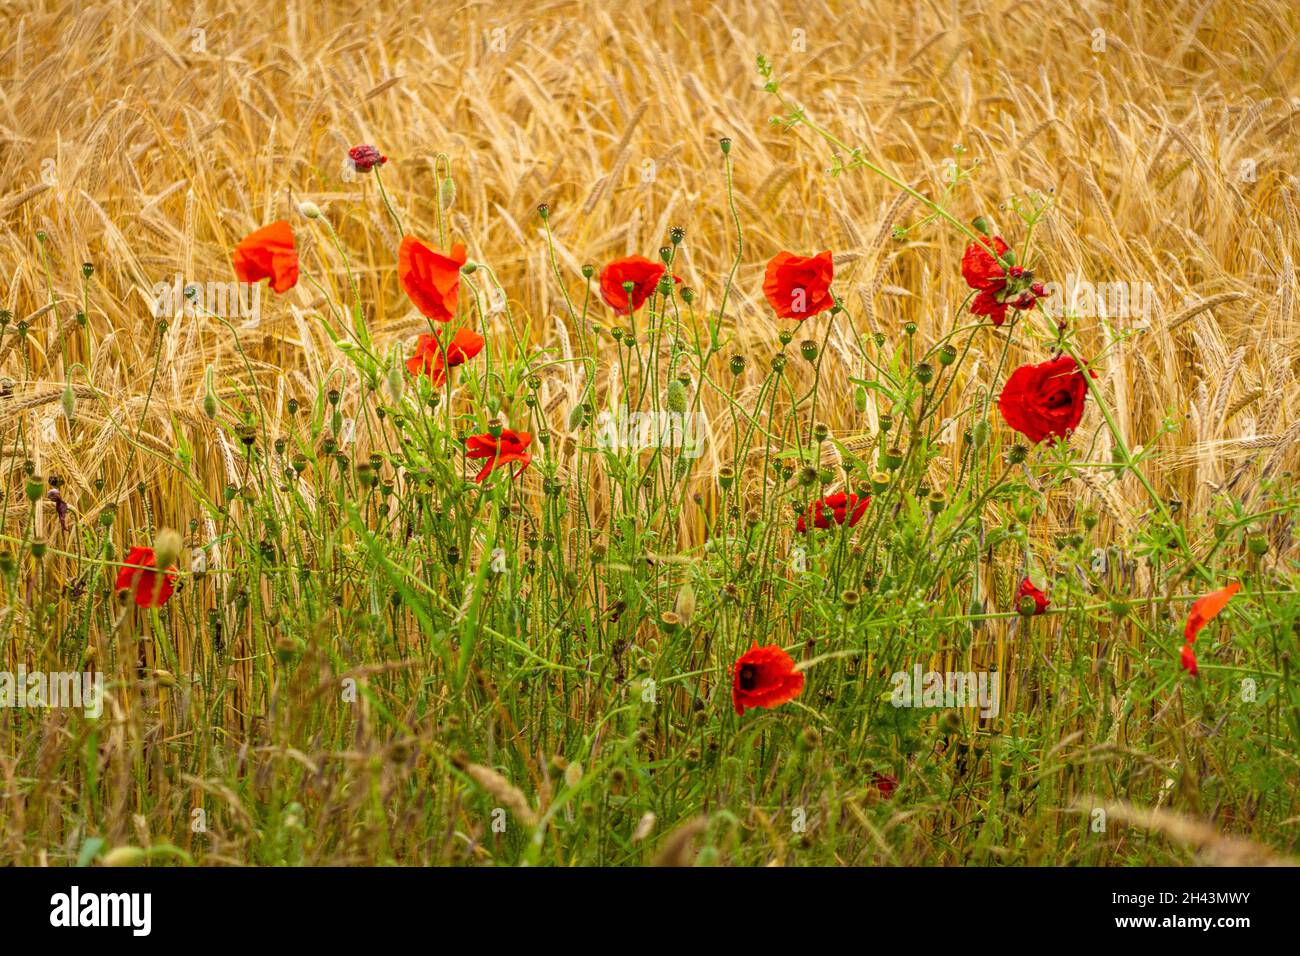 A group of red poppies at the edge of a corn field Stock Photo